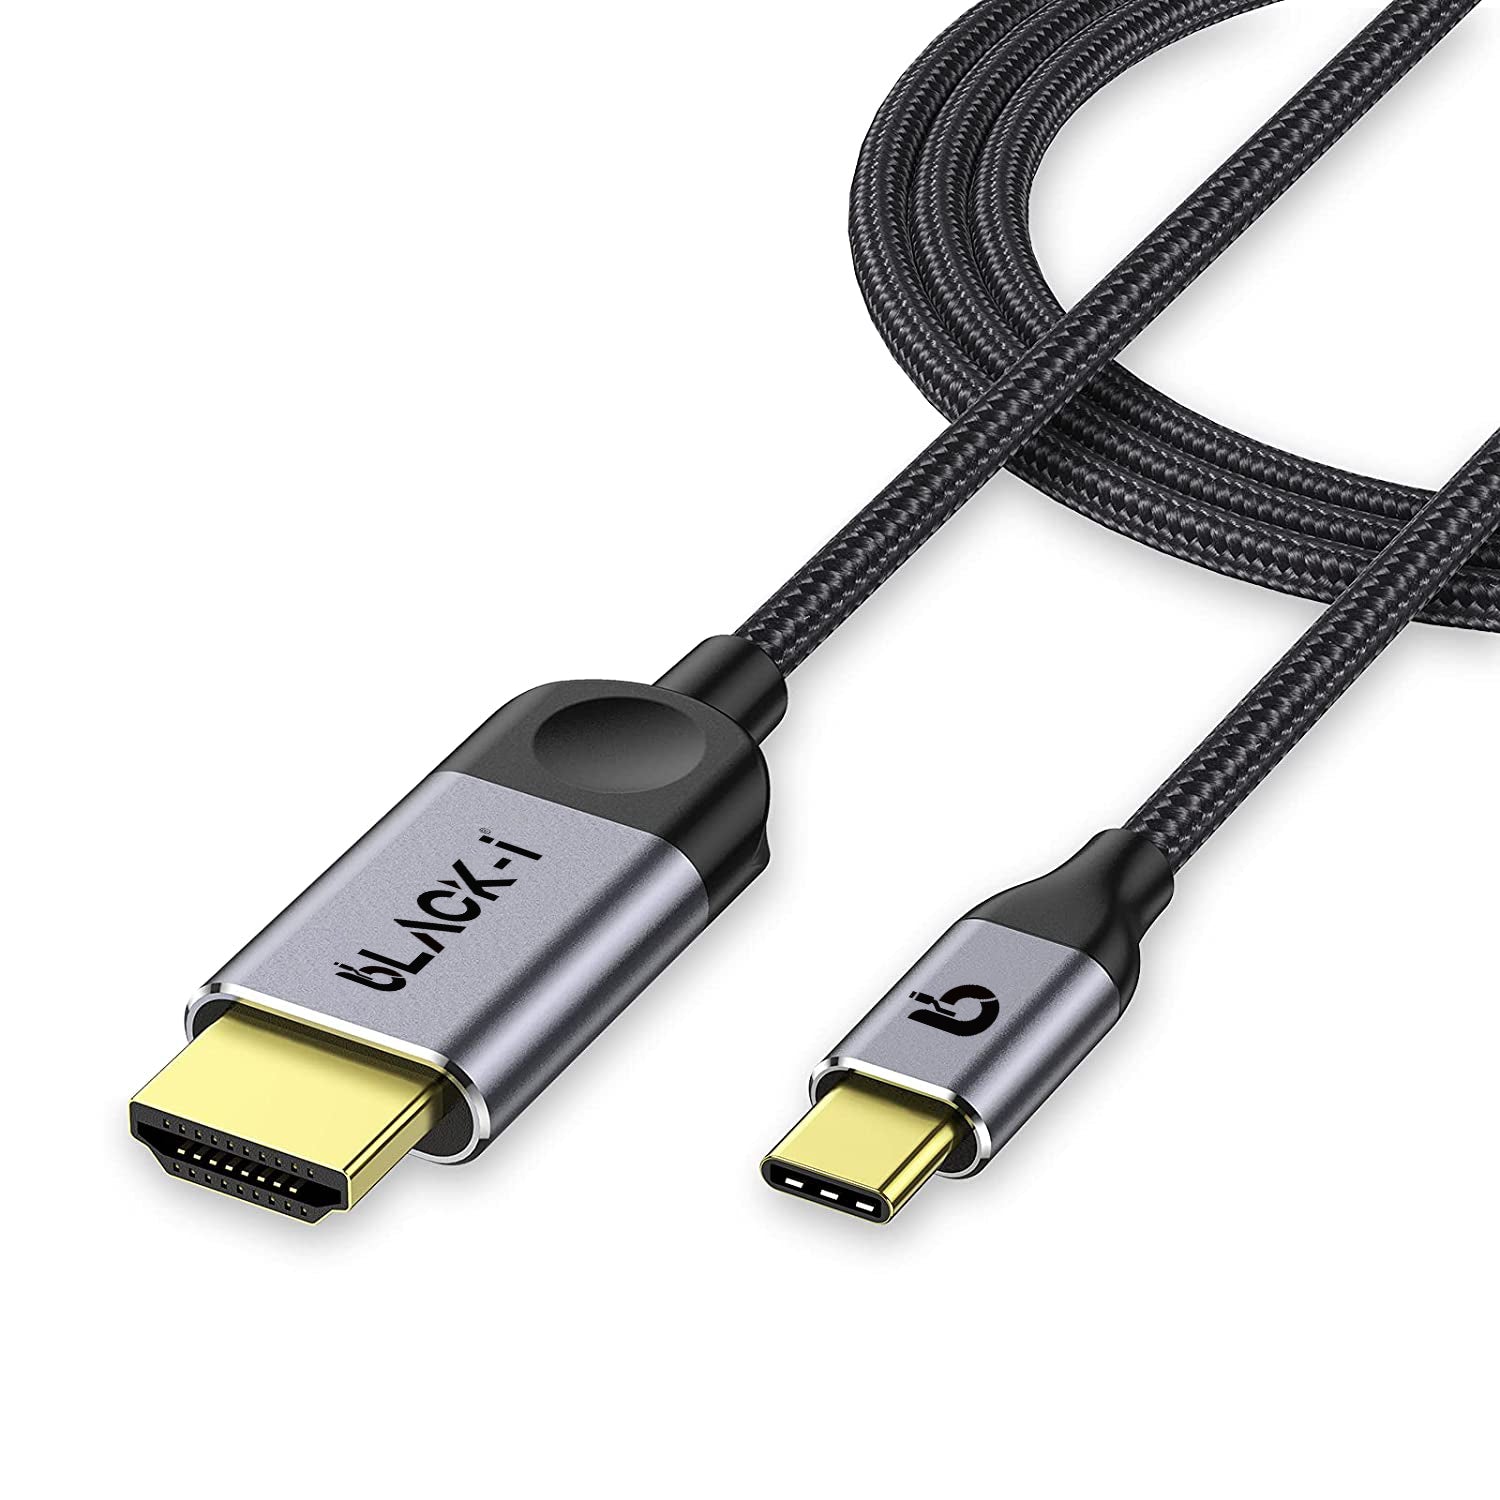 Black-i USB-C to HDMI 4K Cable – Streamline Connectivity for Stunning 4K Visuals in a Convenient Design